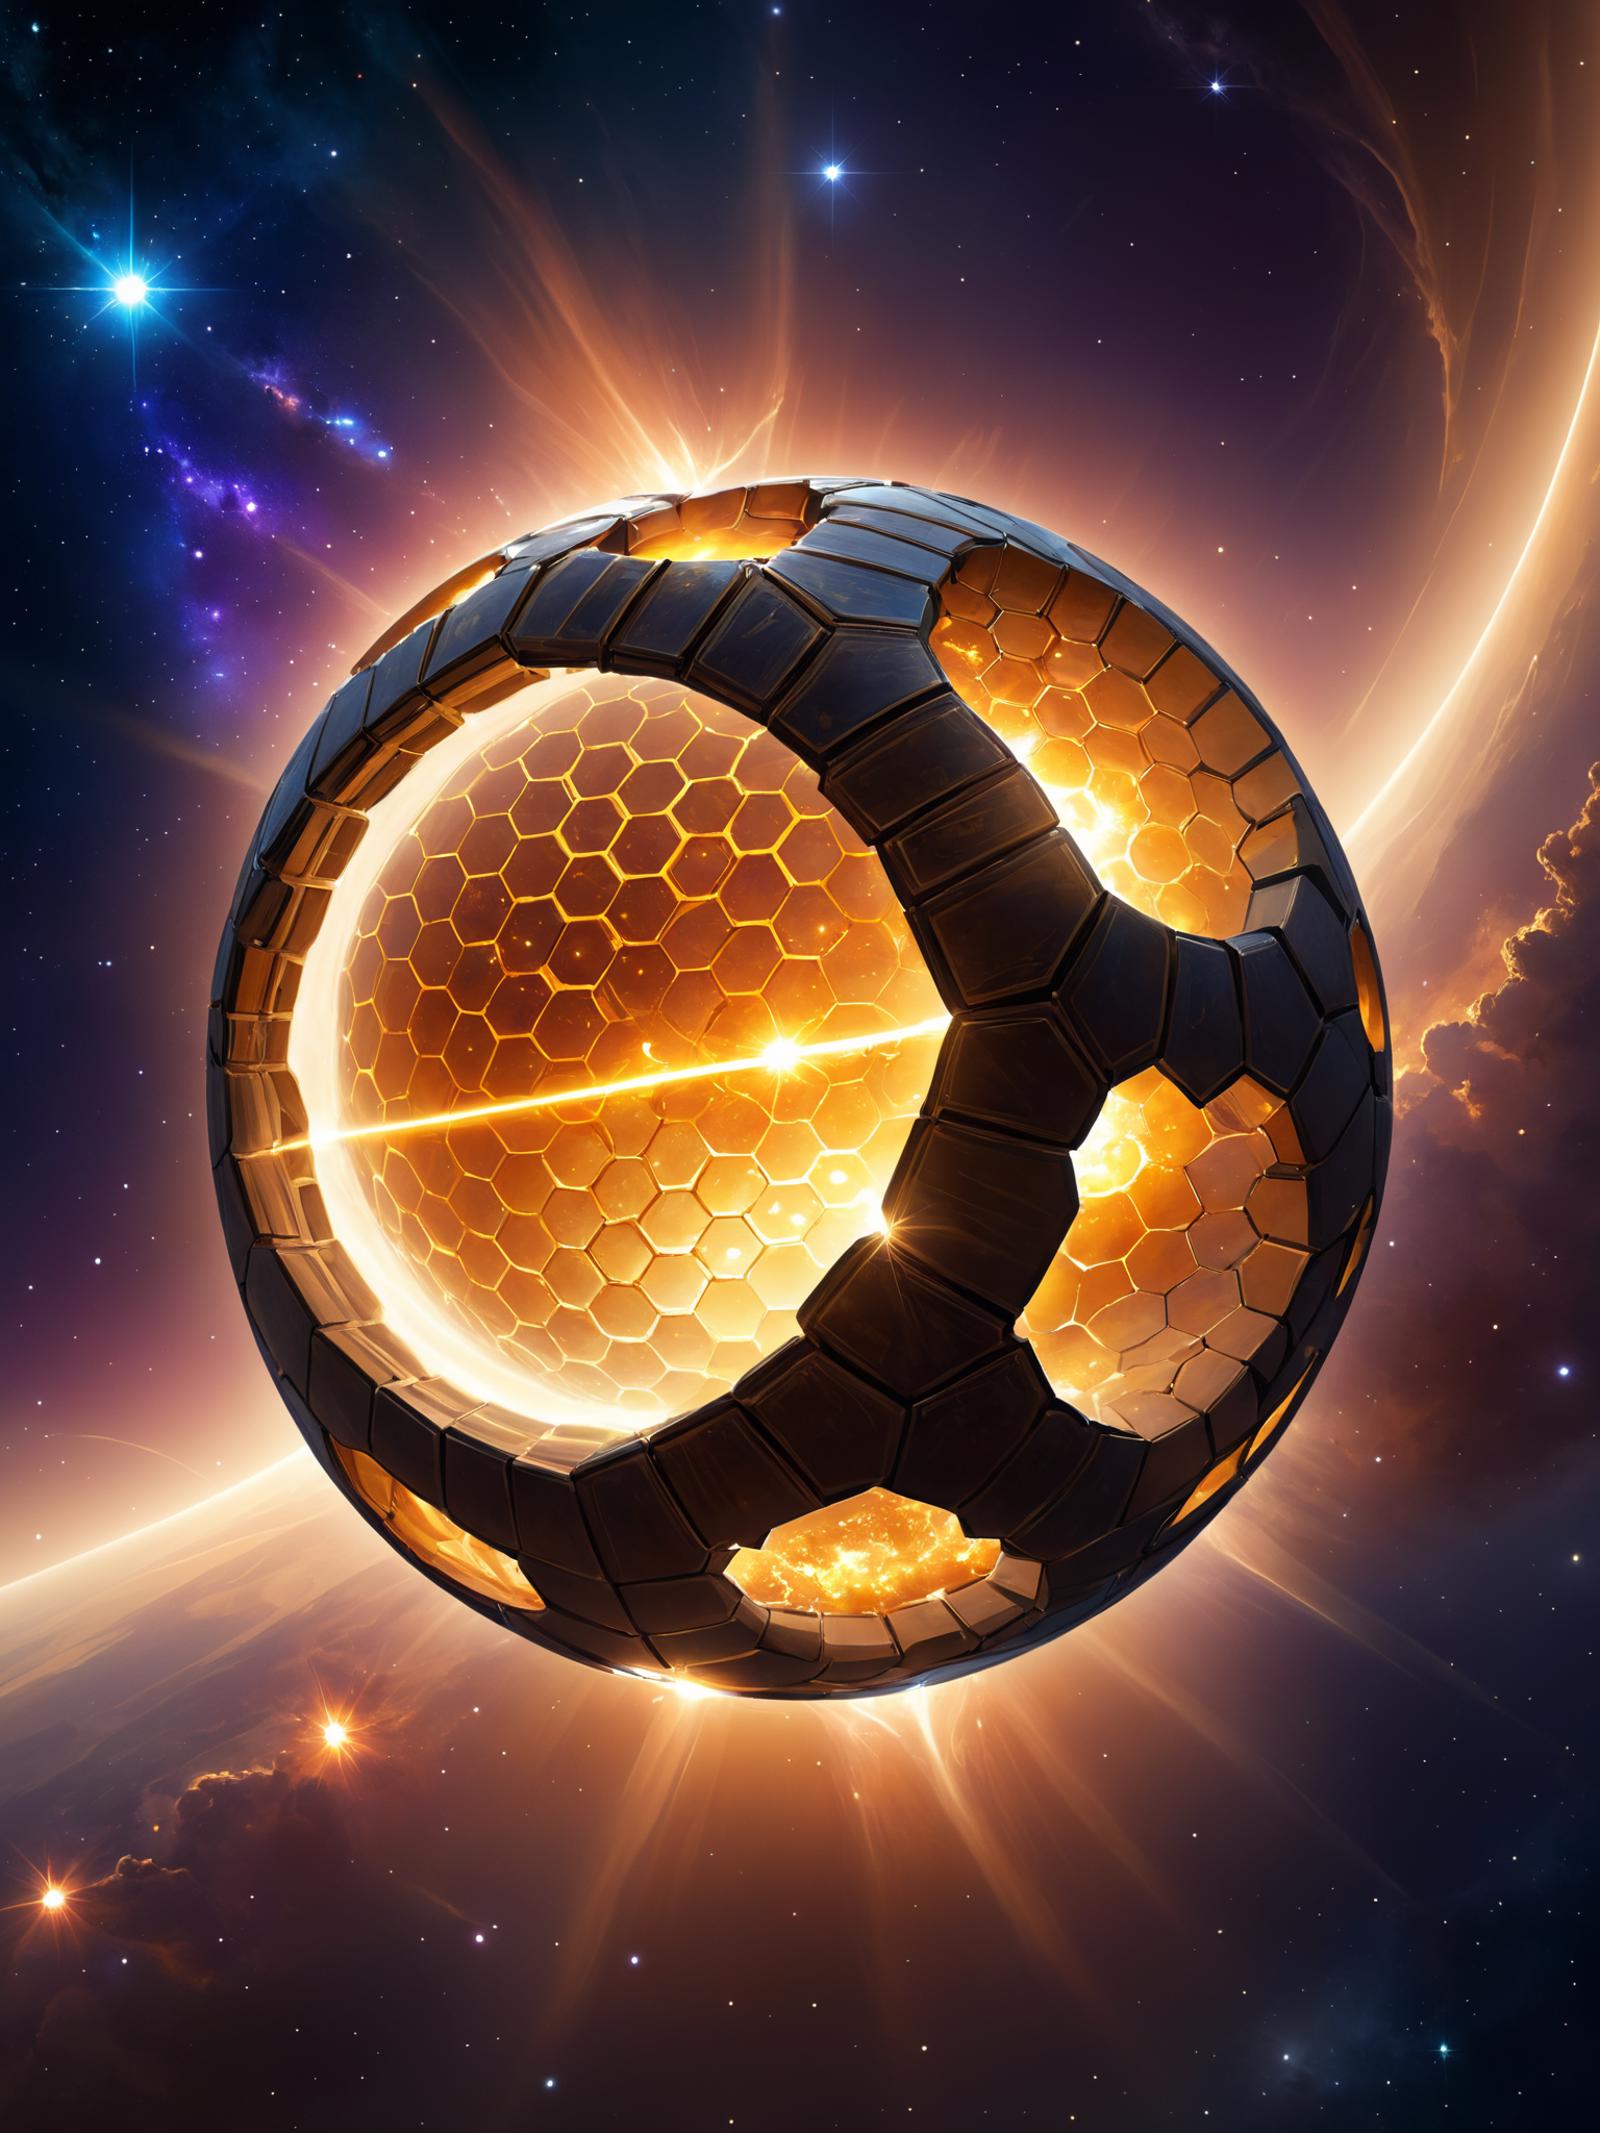 A large, detailed soccer ball floating in space.